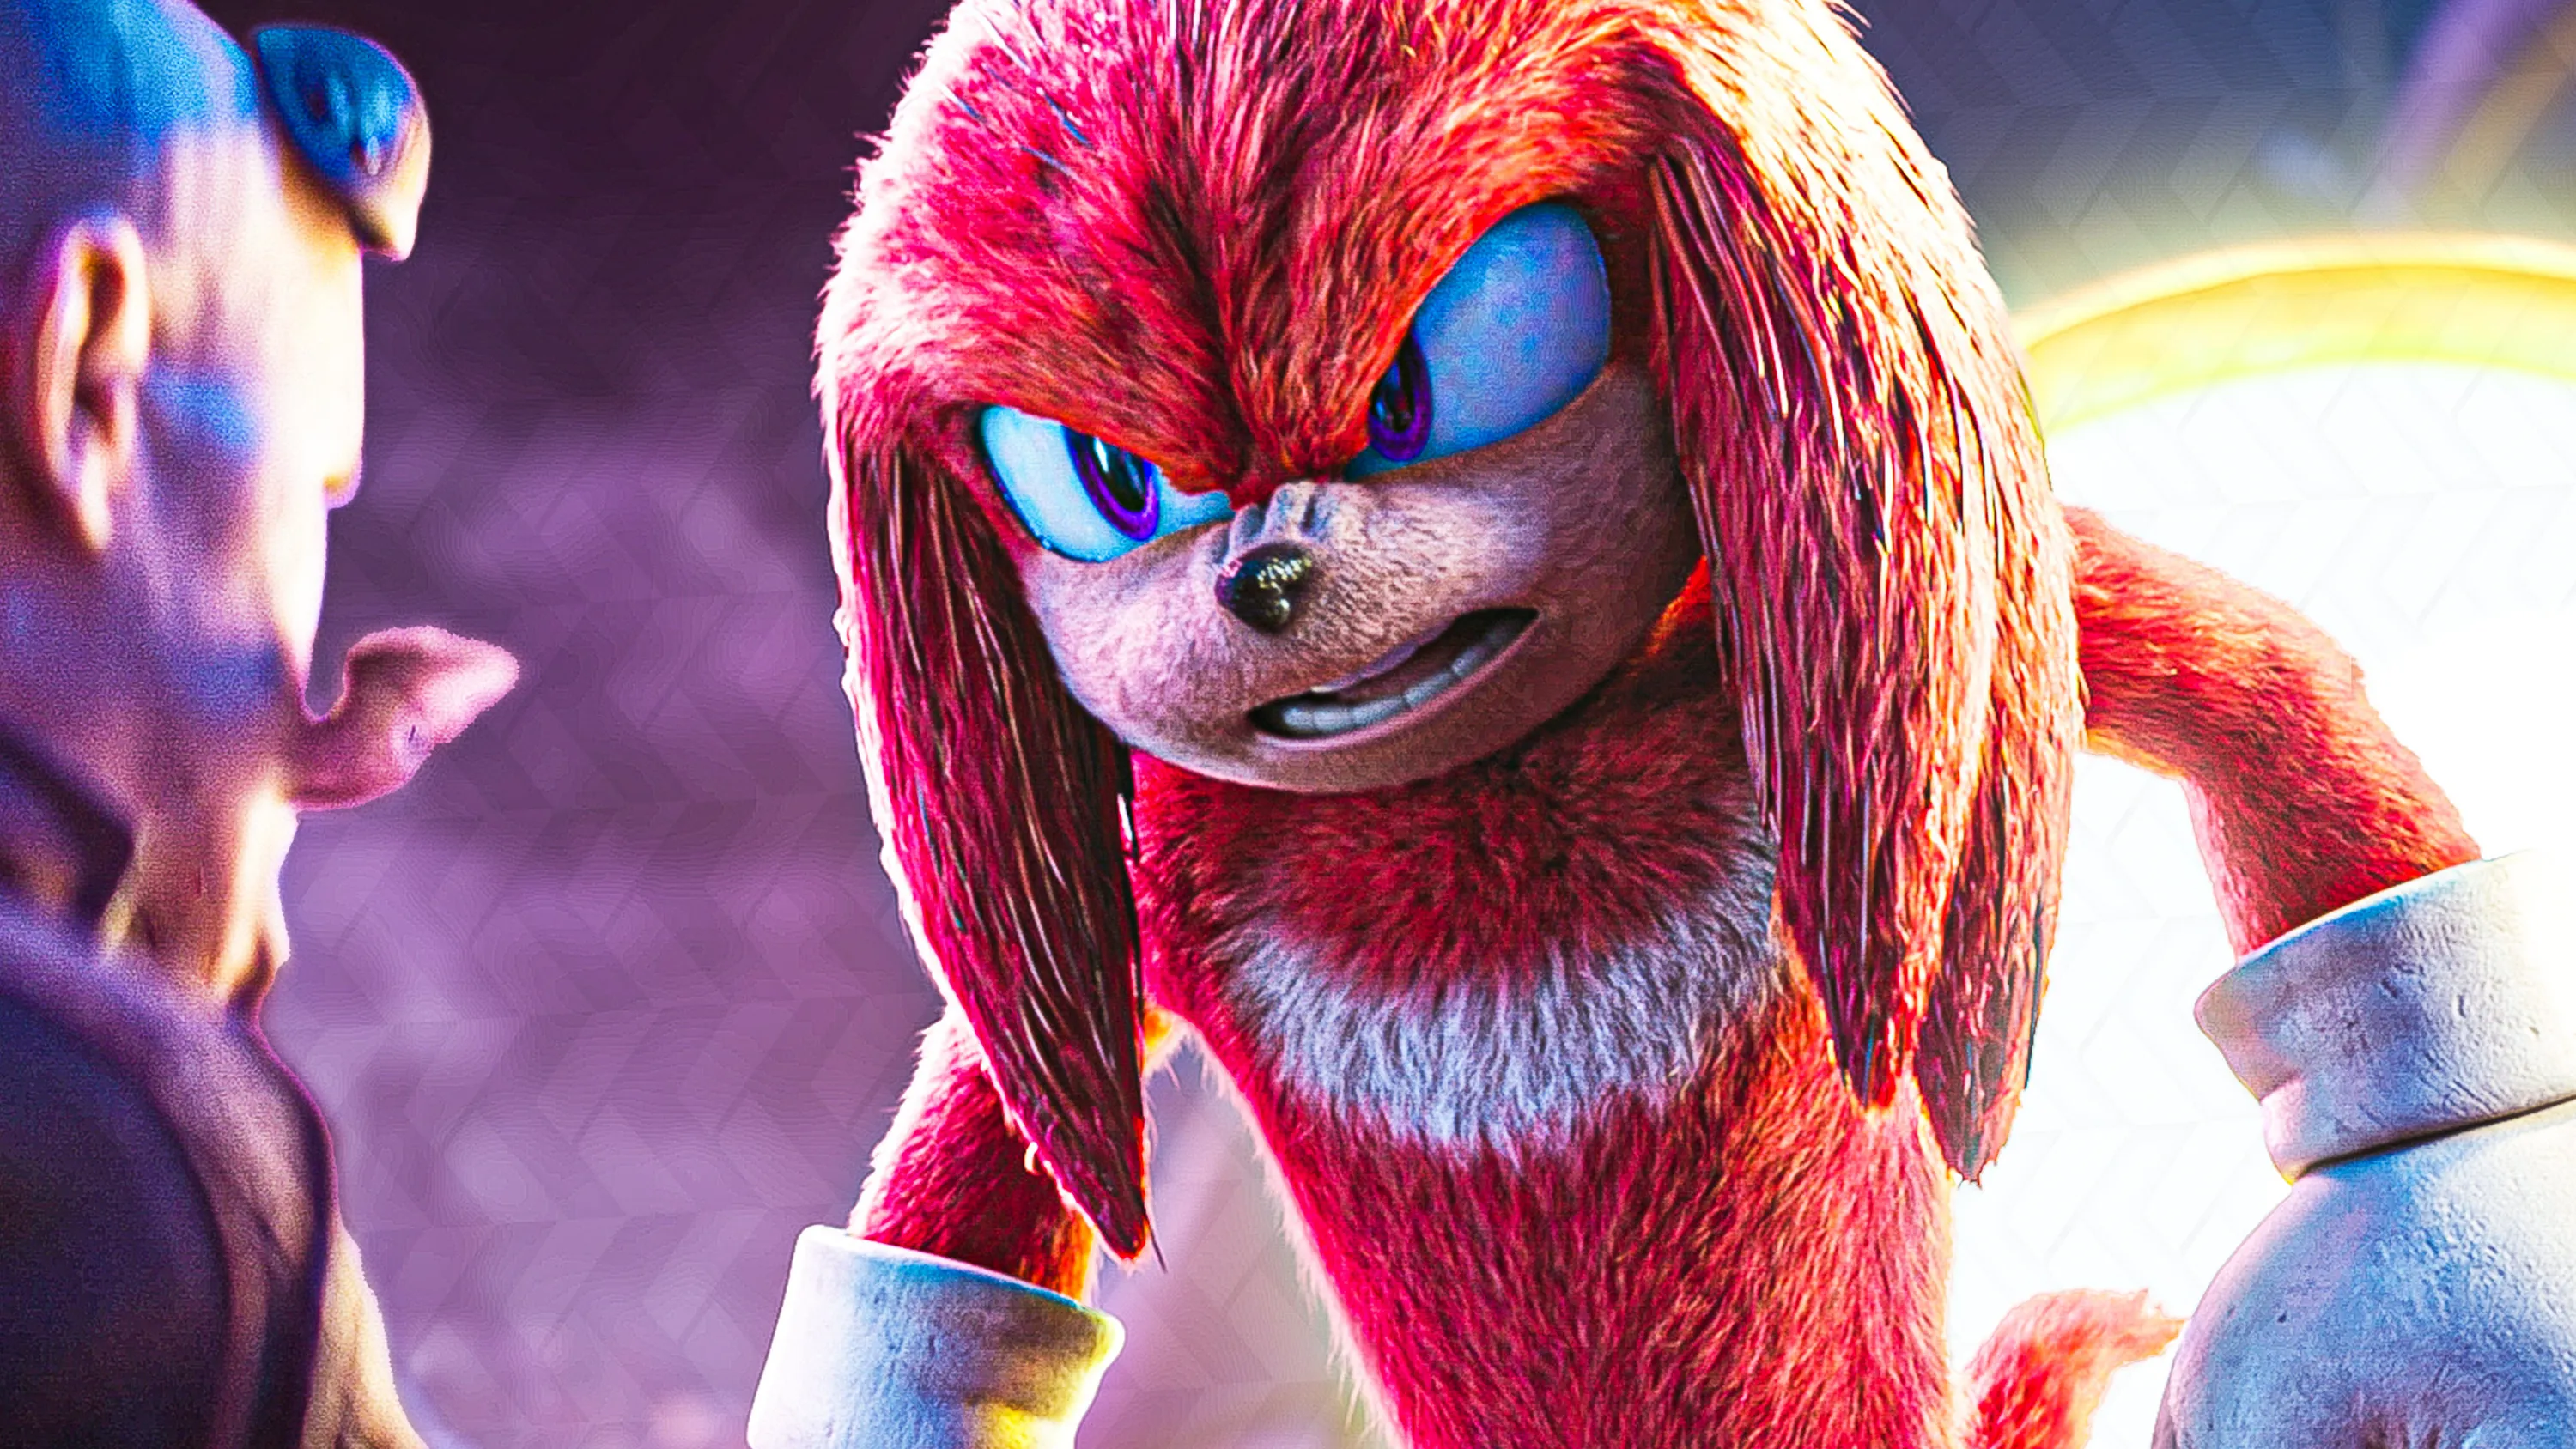 SONIC 3 Movie and Paramount+ Knuckles Series Officially Confirmed